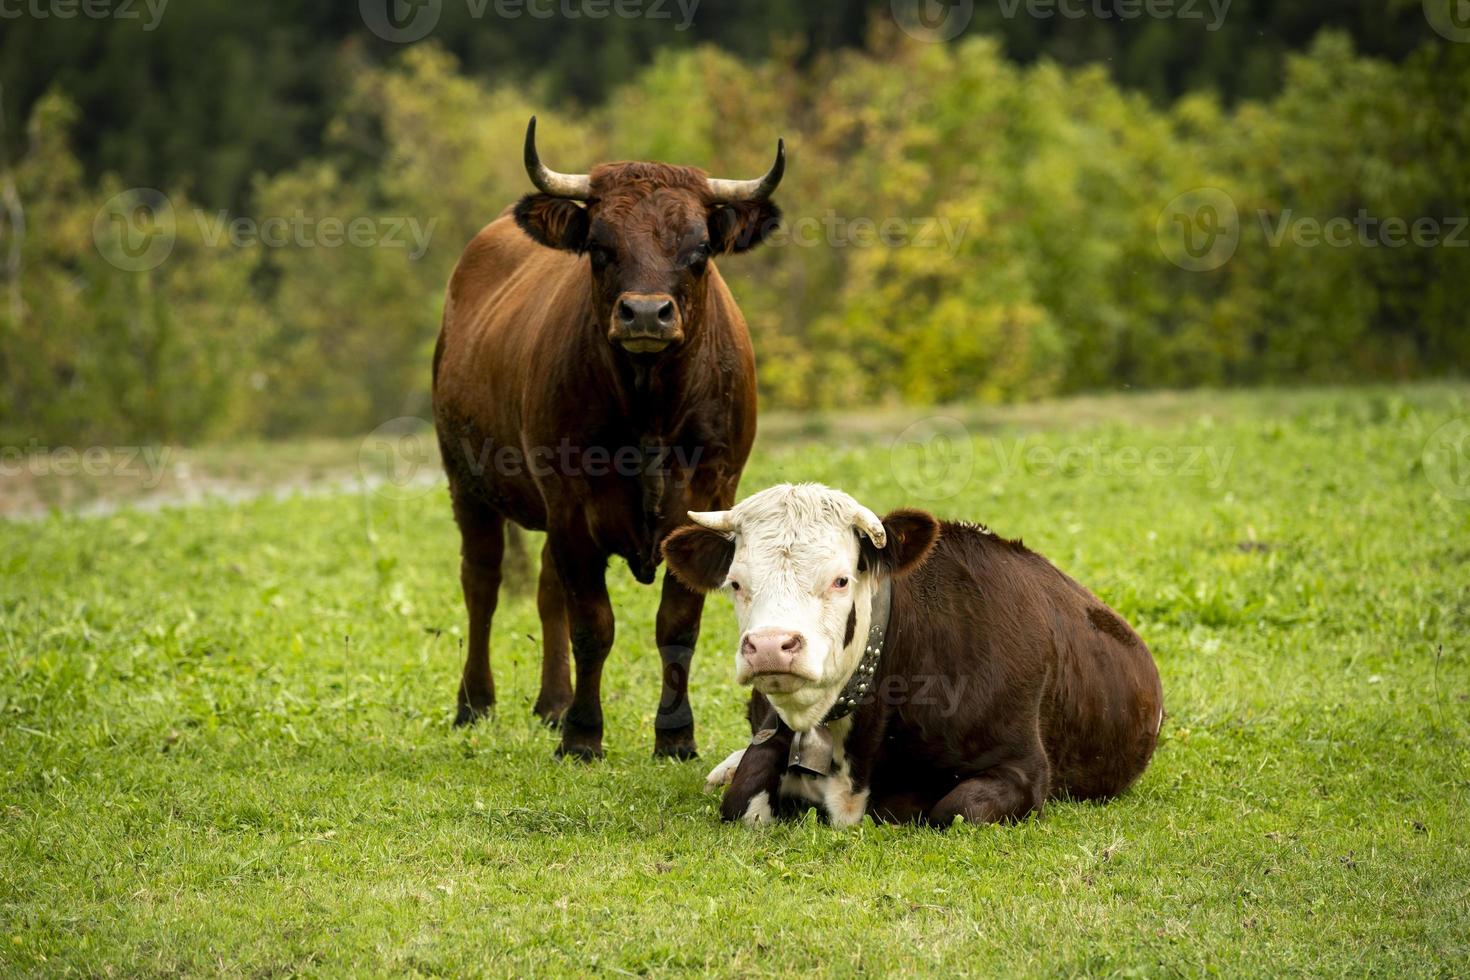 A young bull and a young spotted cow in a green grass field photo